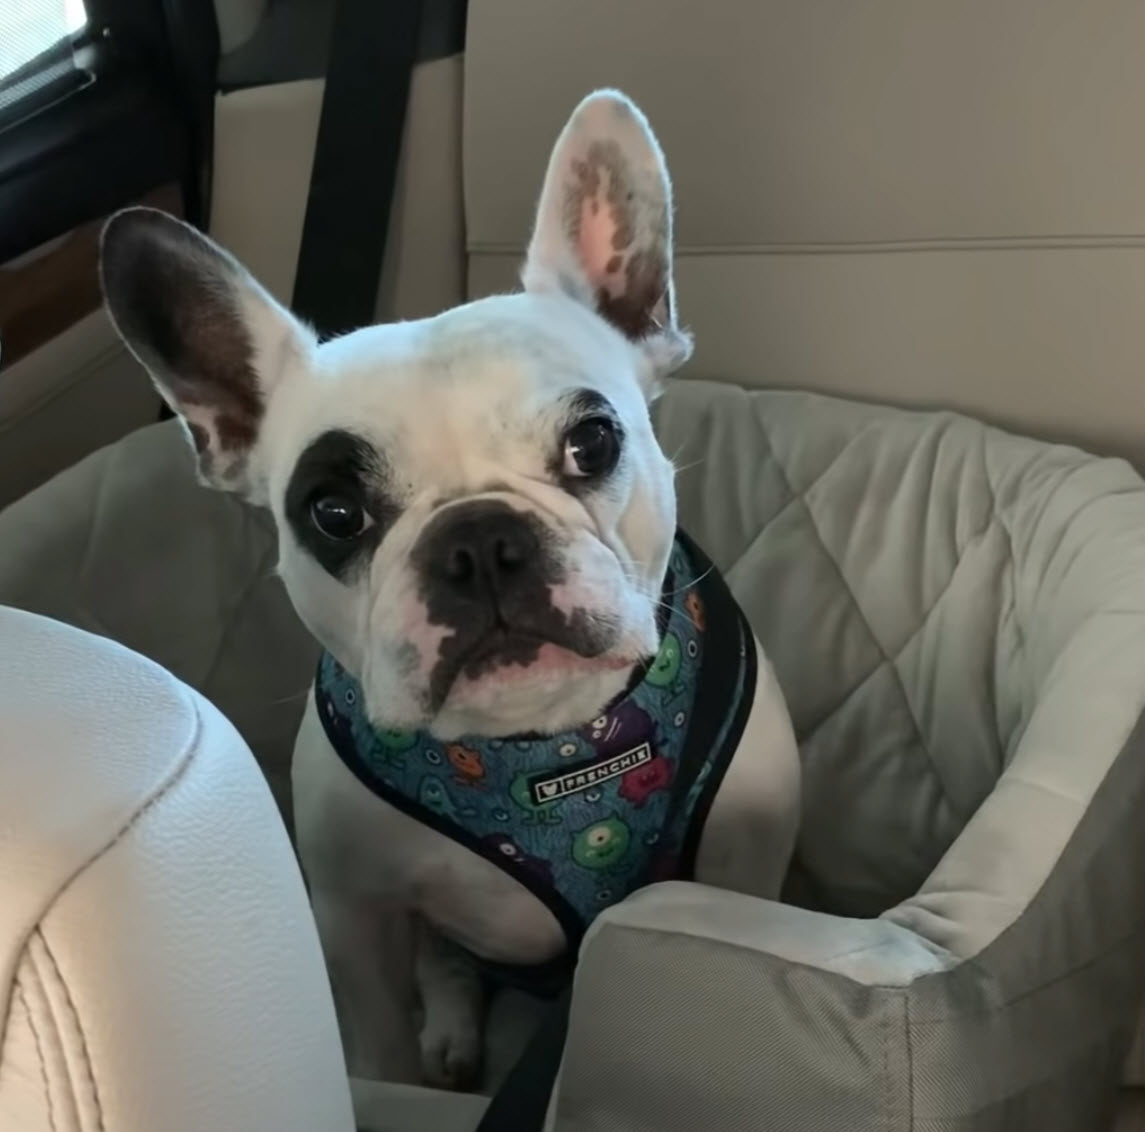 Mom Tells Frenchie The Dog Park Is Closed, Pup Throws Hysterical 'Tantrum'  In Protest